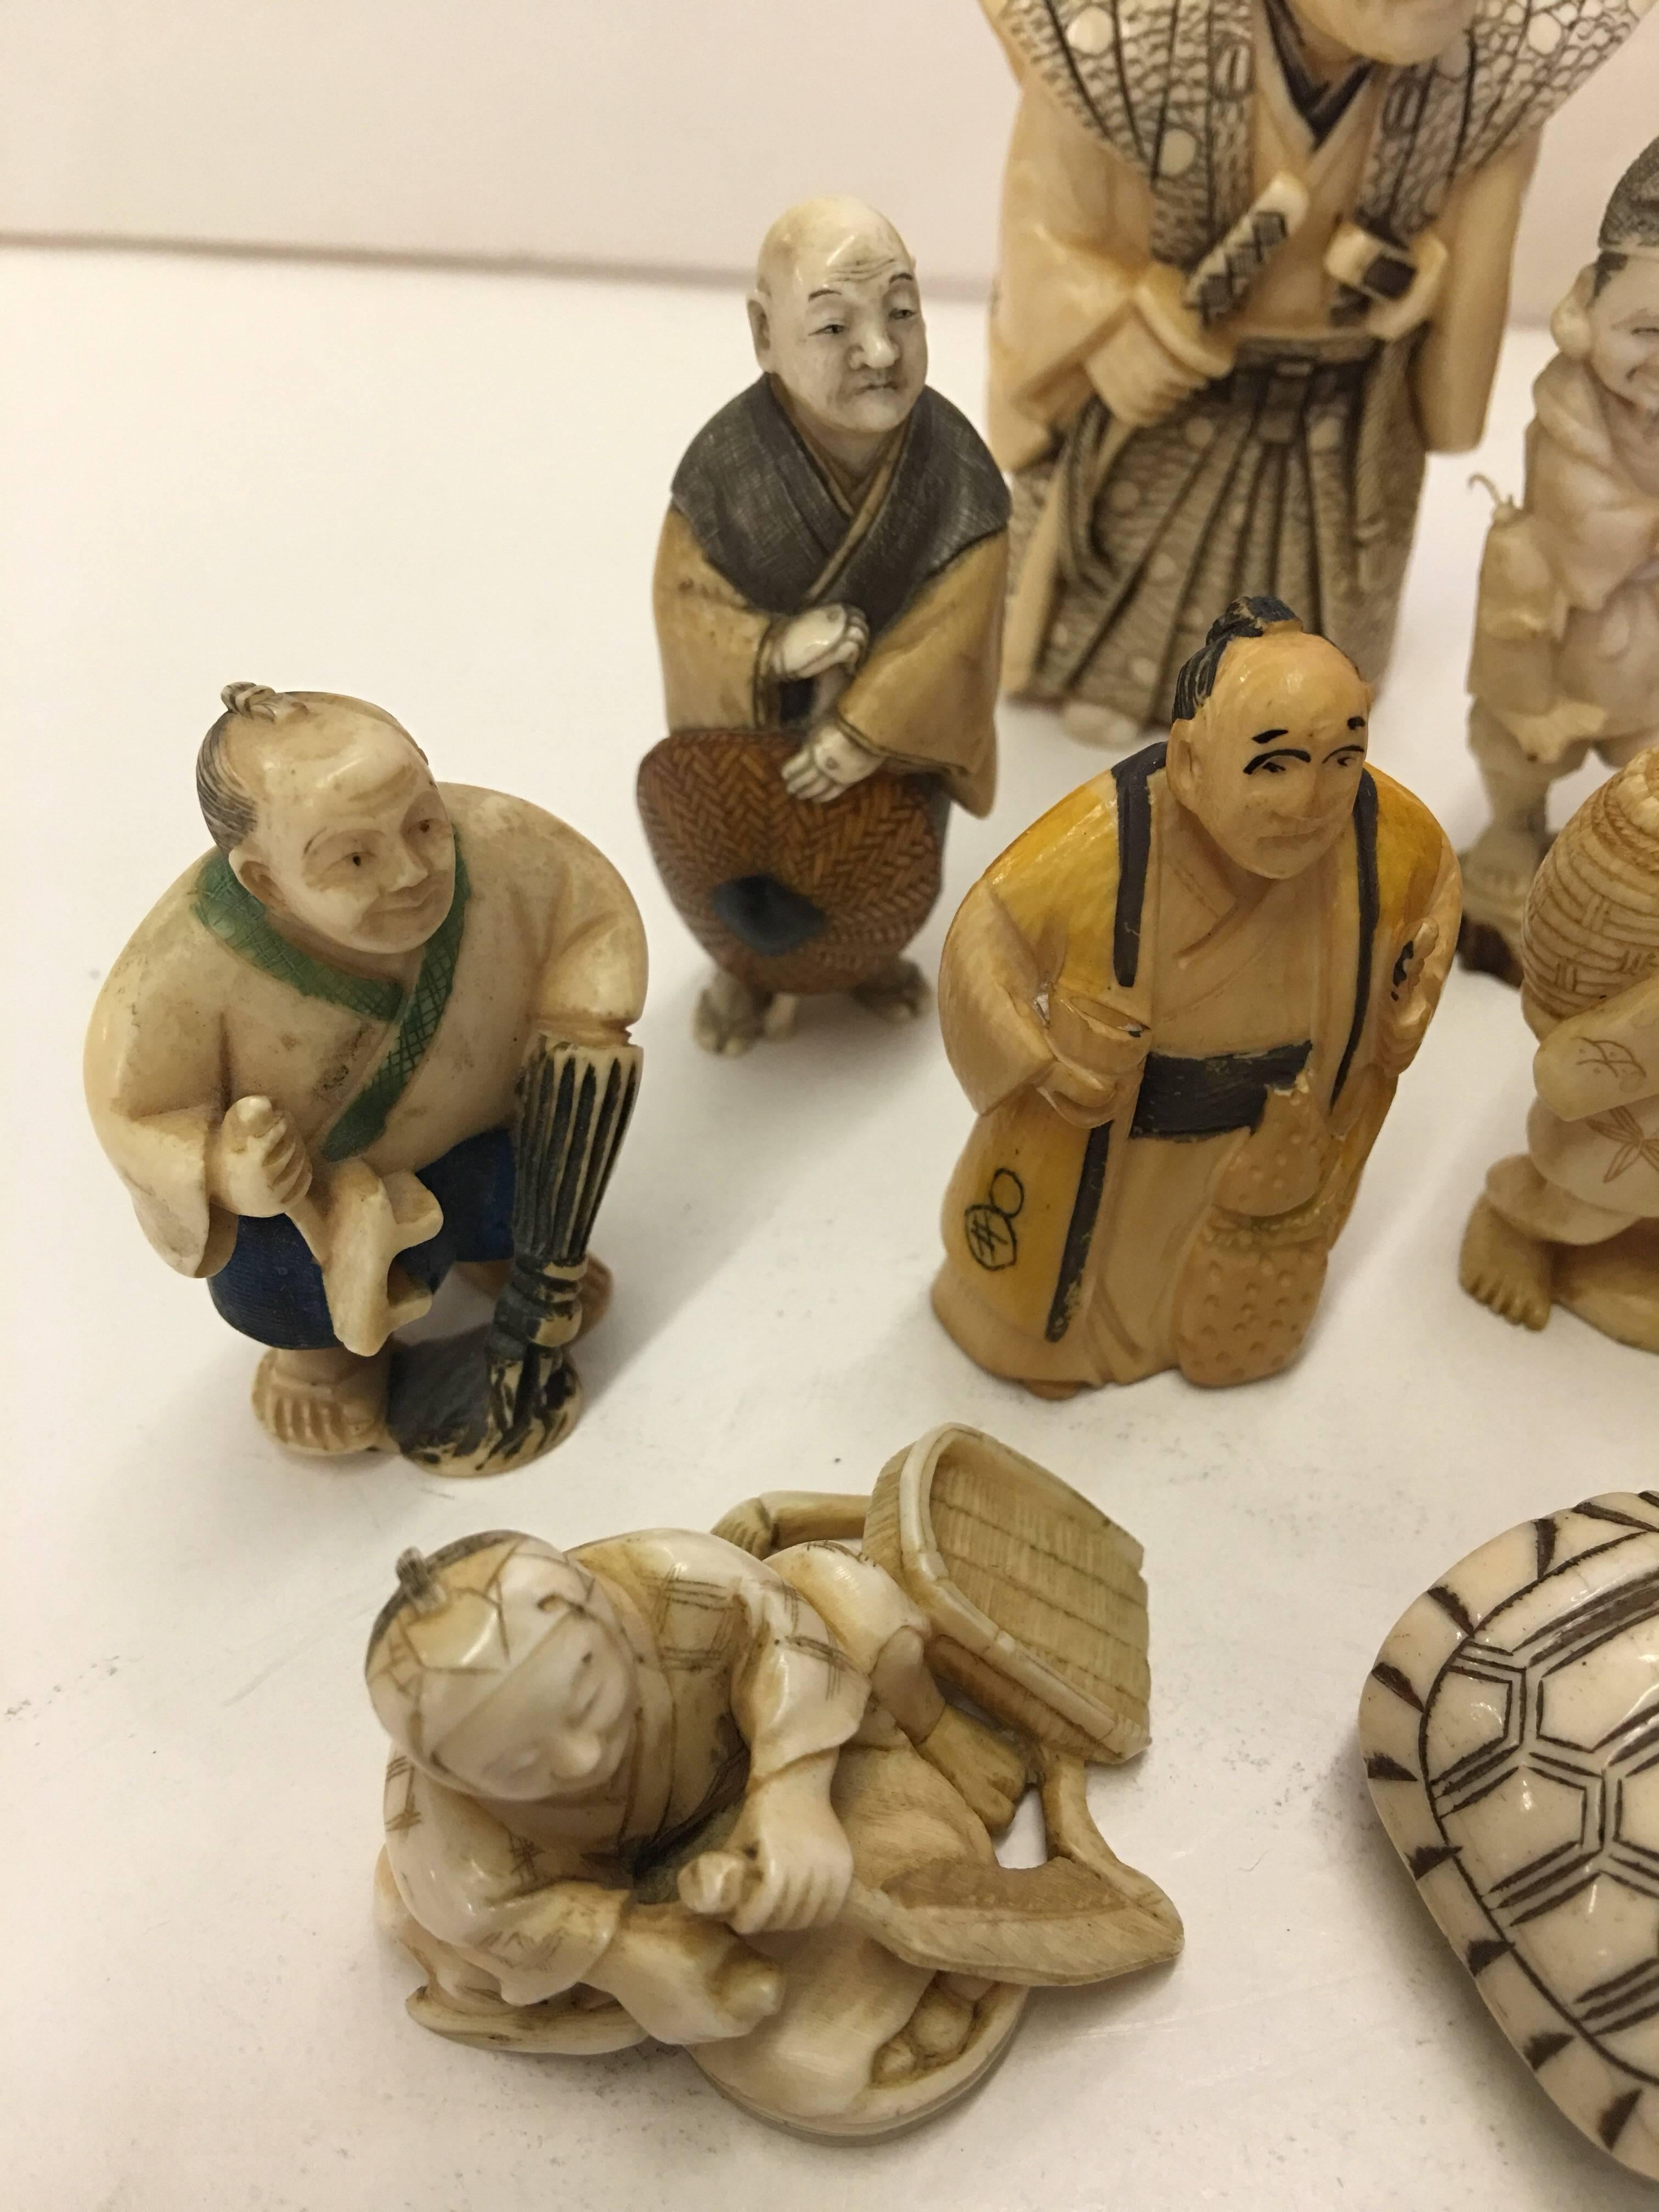 There are 18 figures all from one collector. Some are signed. These are all Meji period, mid to late 1800s to early 20th century. The tallest at back stands 6